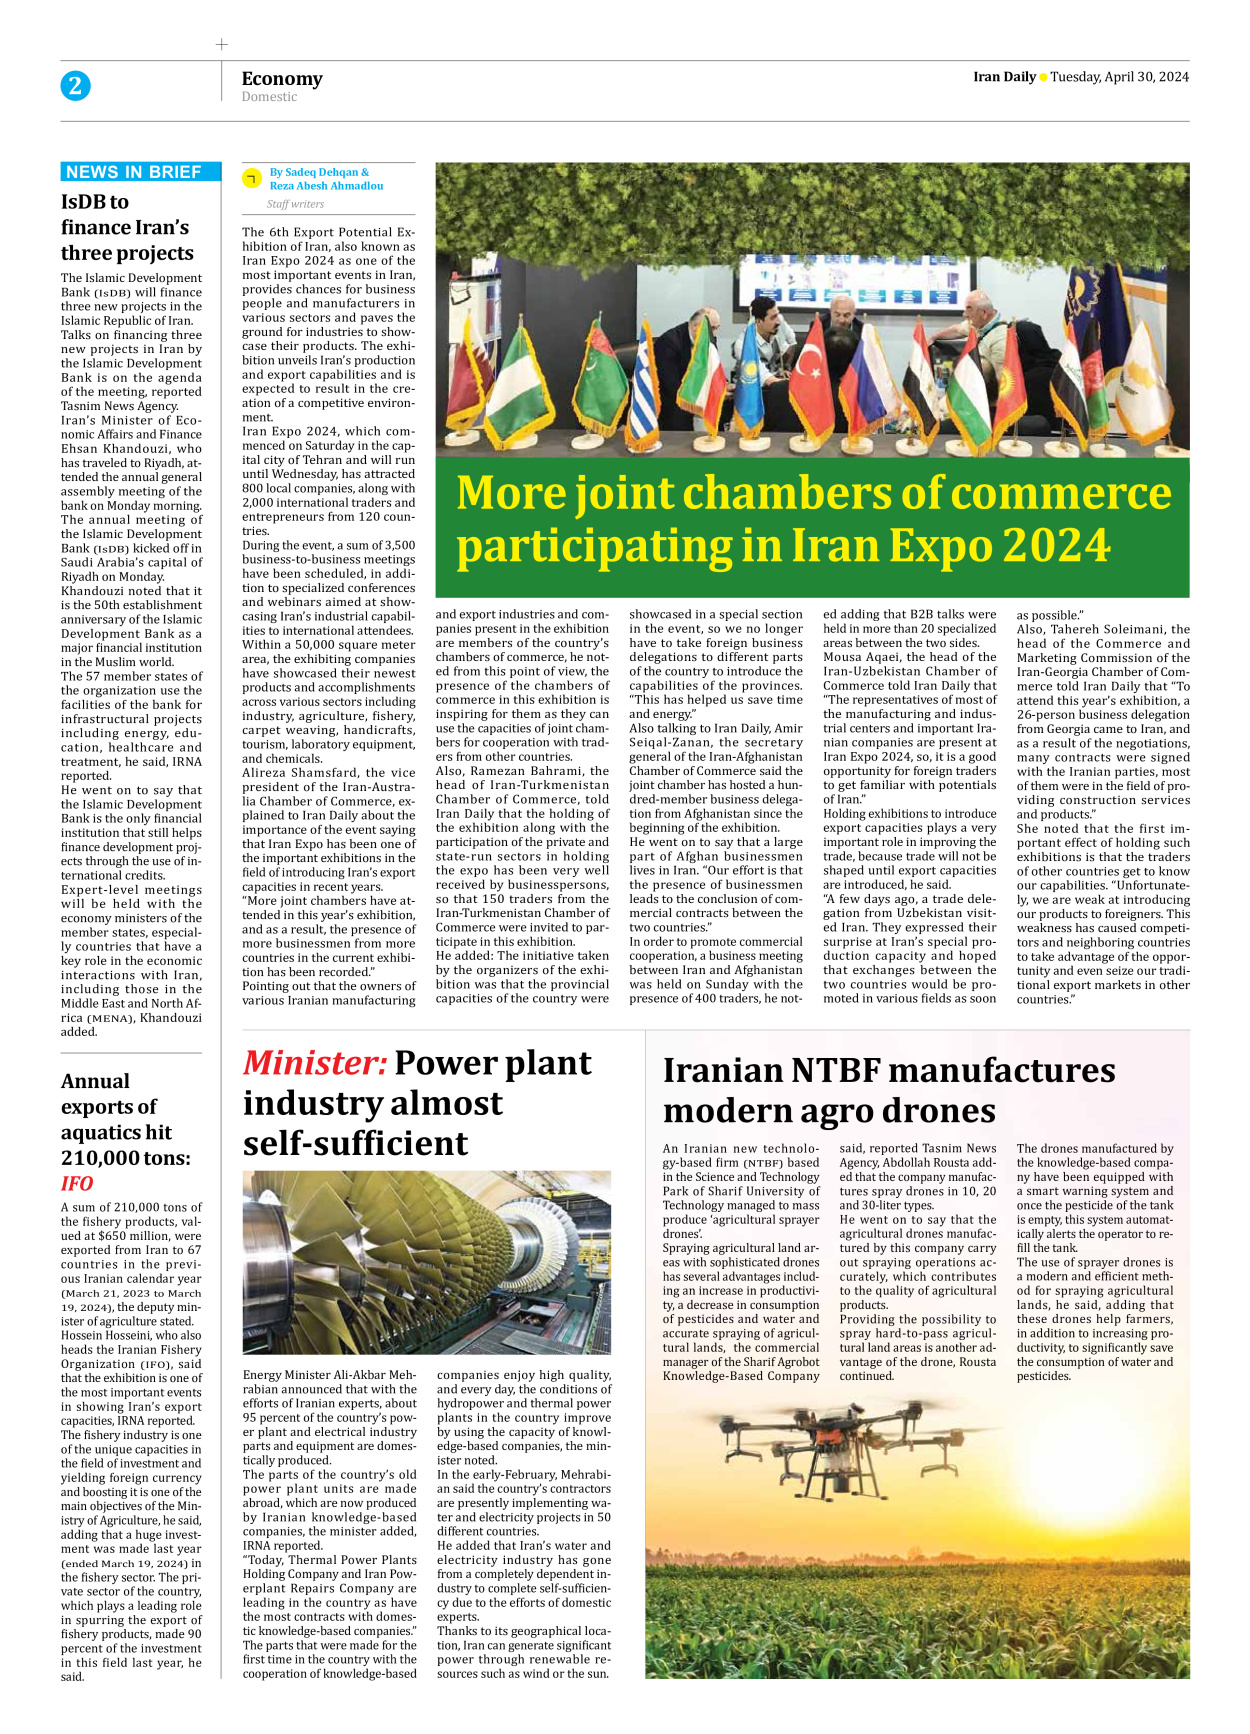 Iran Daily - Number Seven Thousand Five Hundred and Forty Six - 30 April 2024 - Page 2